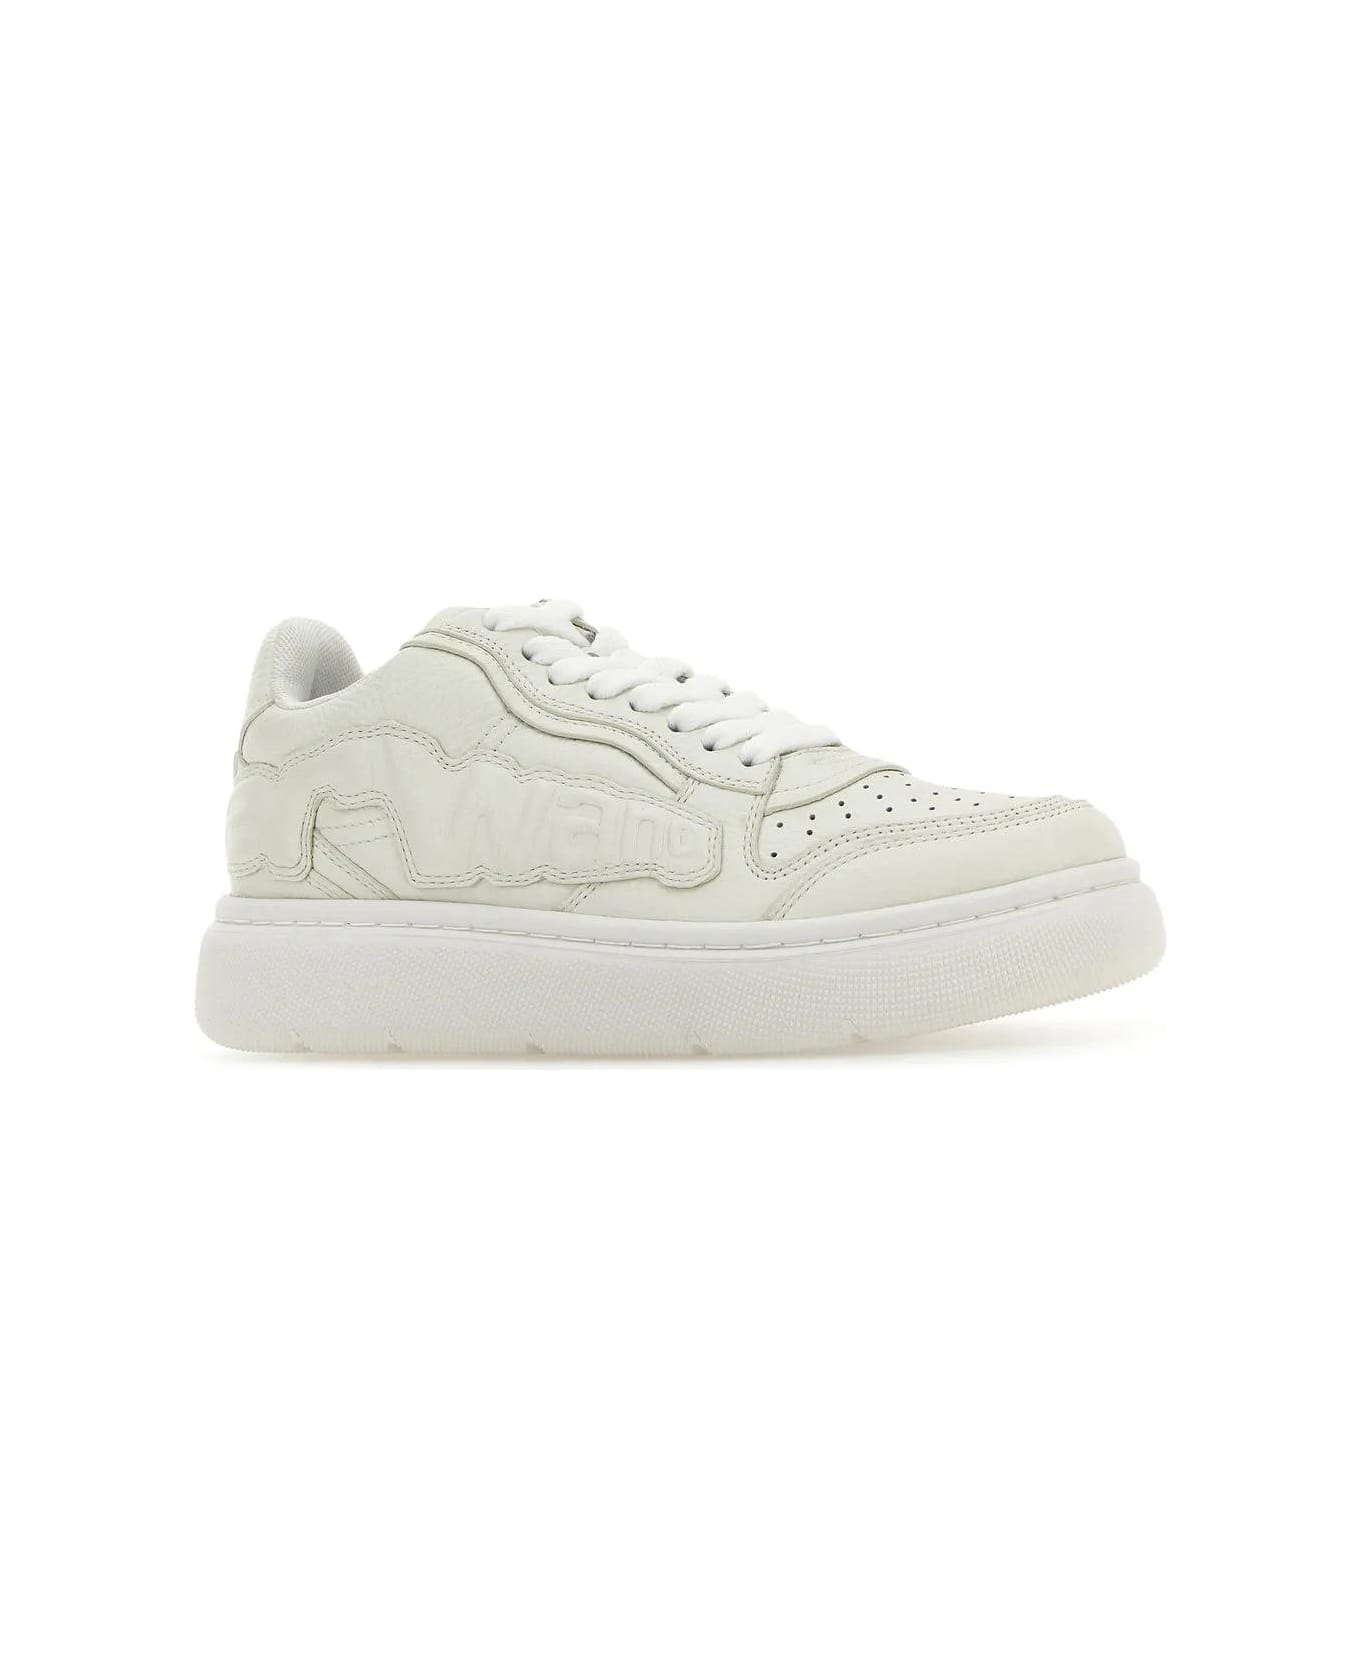 Alexander Wang White Leather Puff Sneakers - Optic White